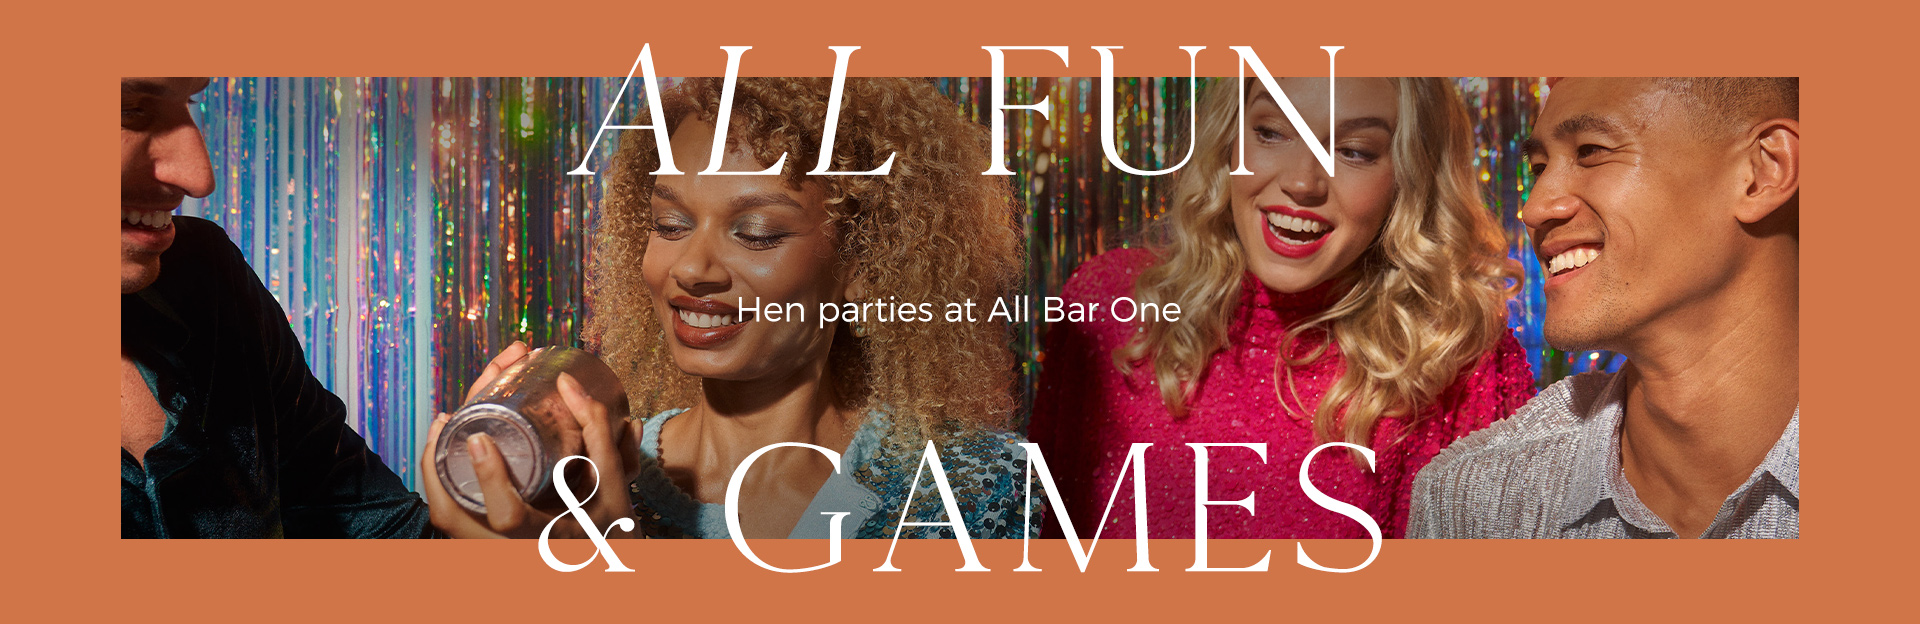 Hen parties at All Bar One Cambridge